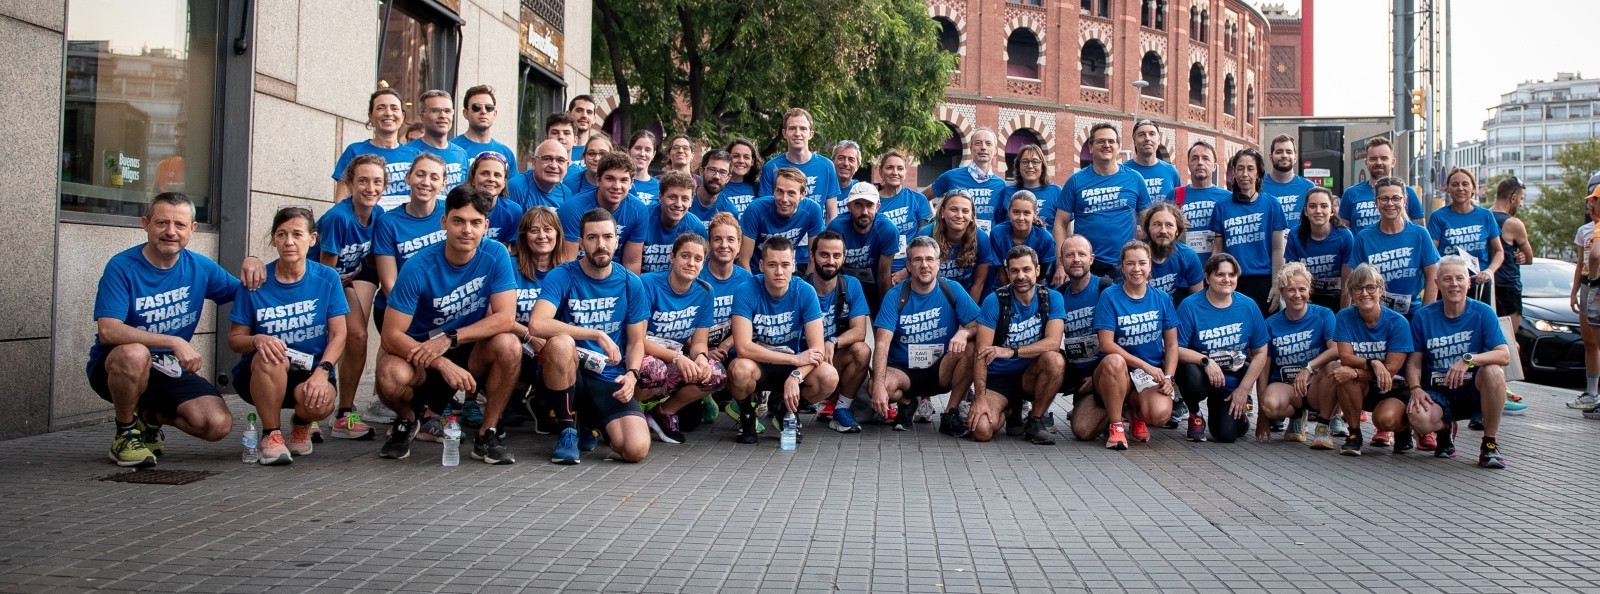 Running team: faster than cancer